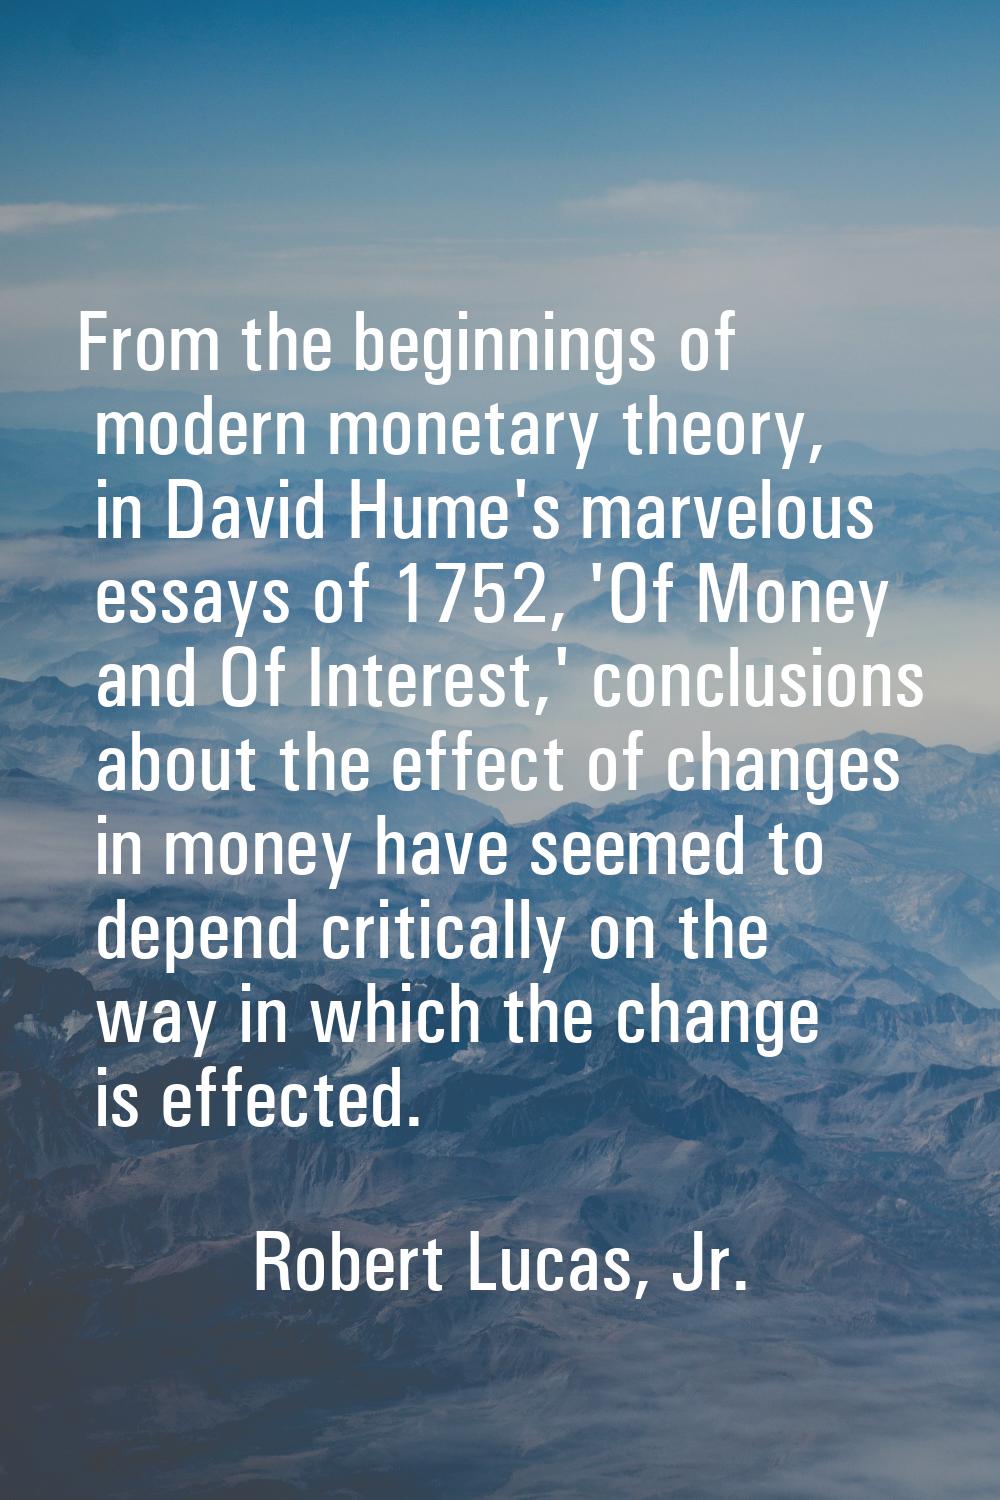 From the beginnings of modern monetary theory, in David Hume's marvelous essays of 1752, 'Of Money 